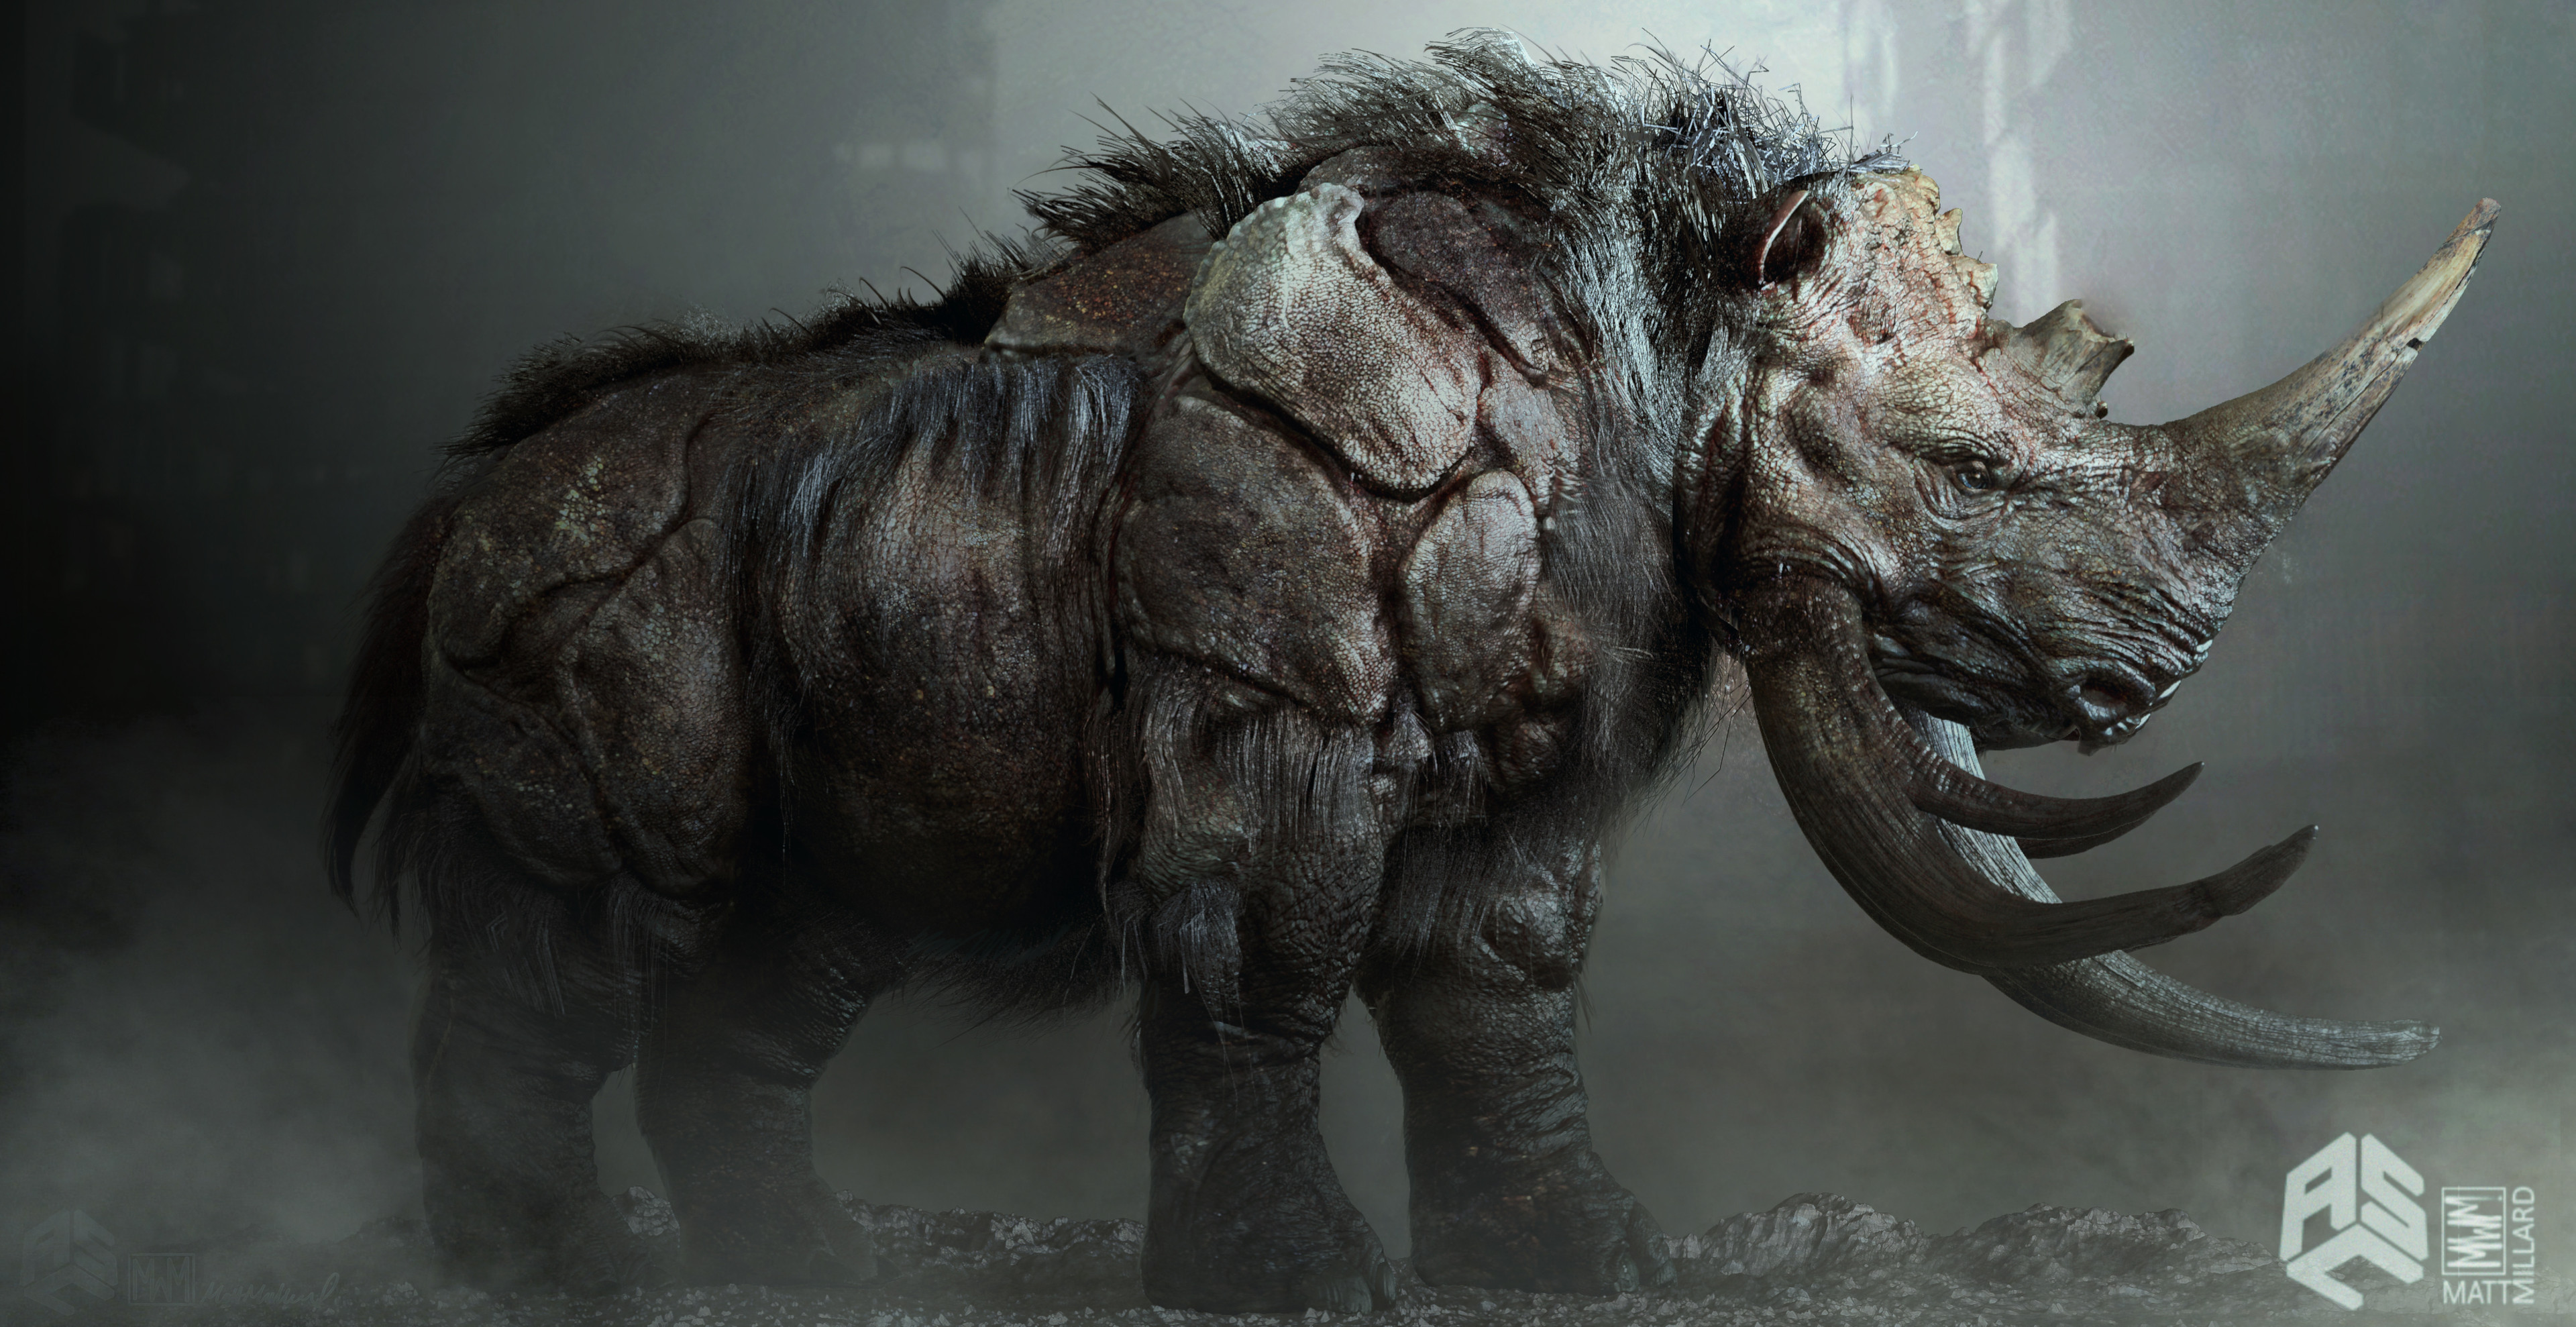 Concept art for the Woolly Rhino for the TV show ZOO season 3. This was the first bad boy in the season and it was really fun watching him destroy!!
